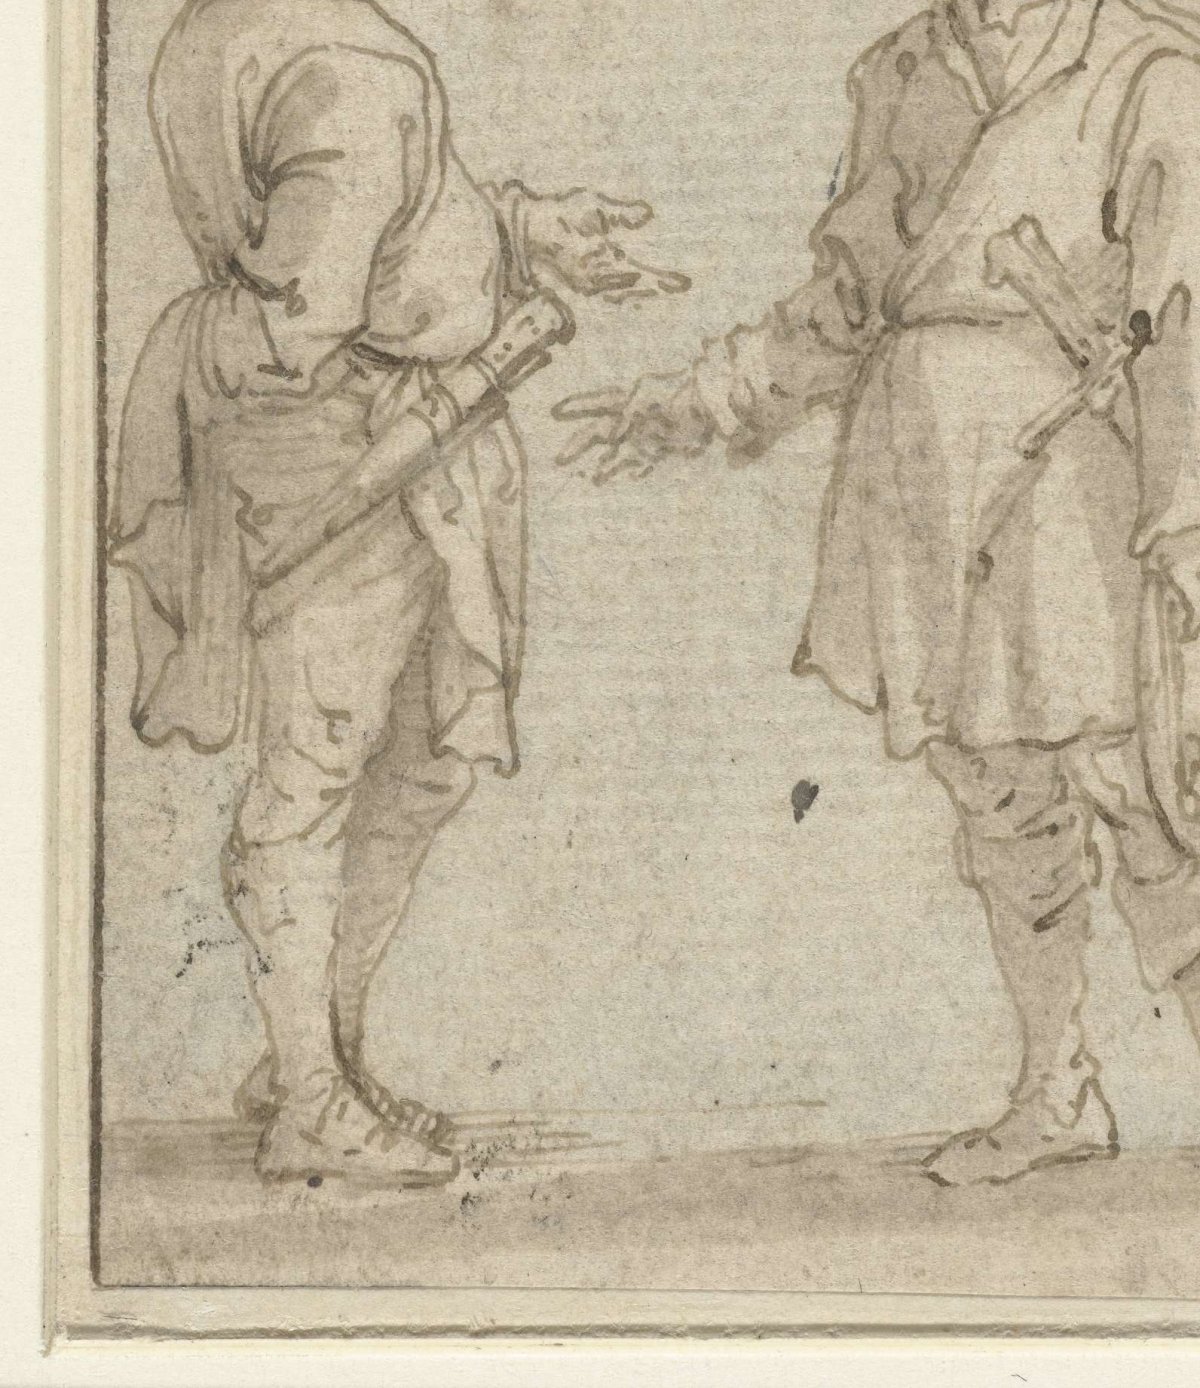 Two standing men talking to each other, Jacob Roos, 1600 - 1760